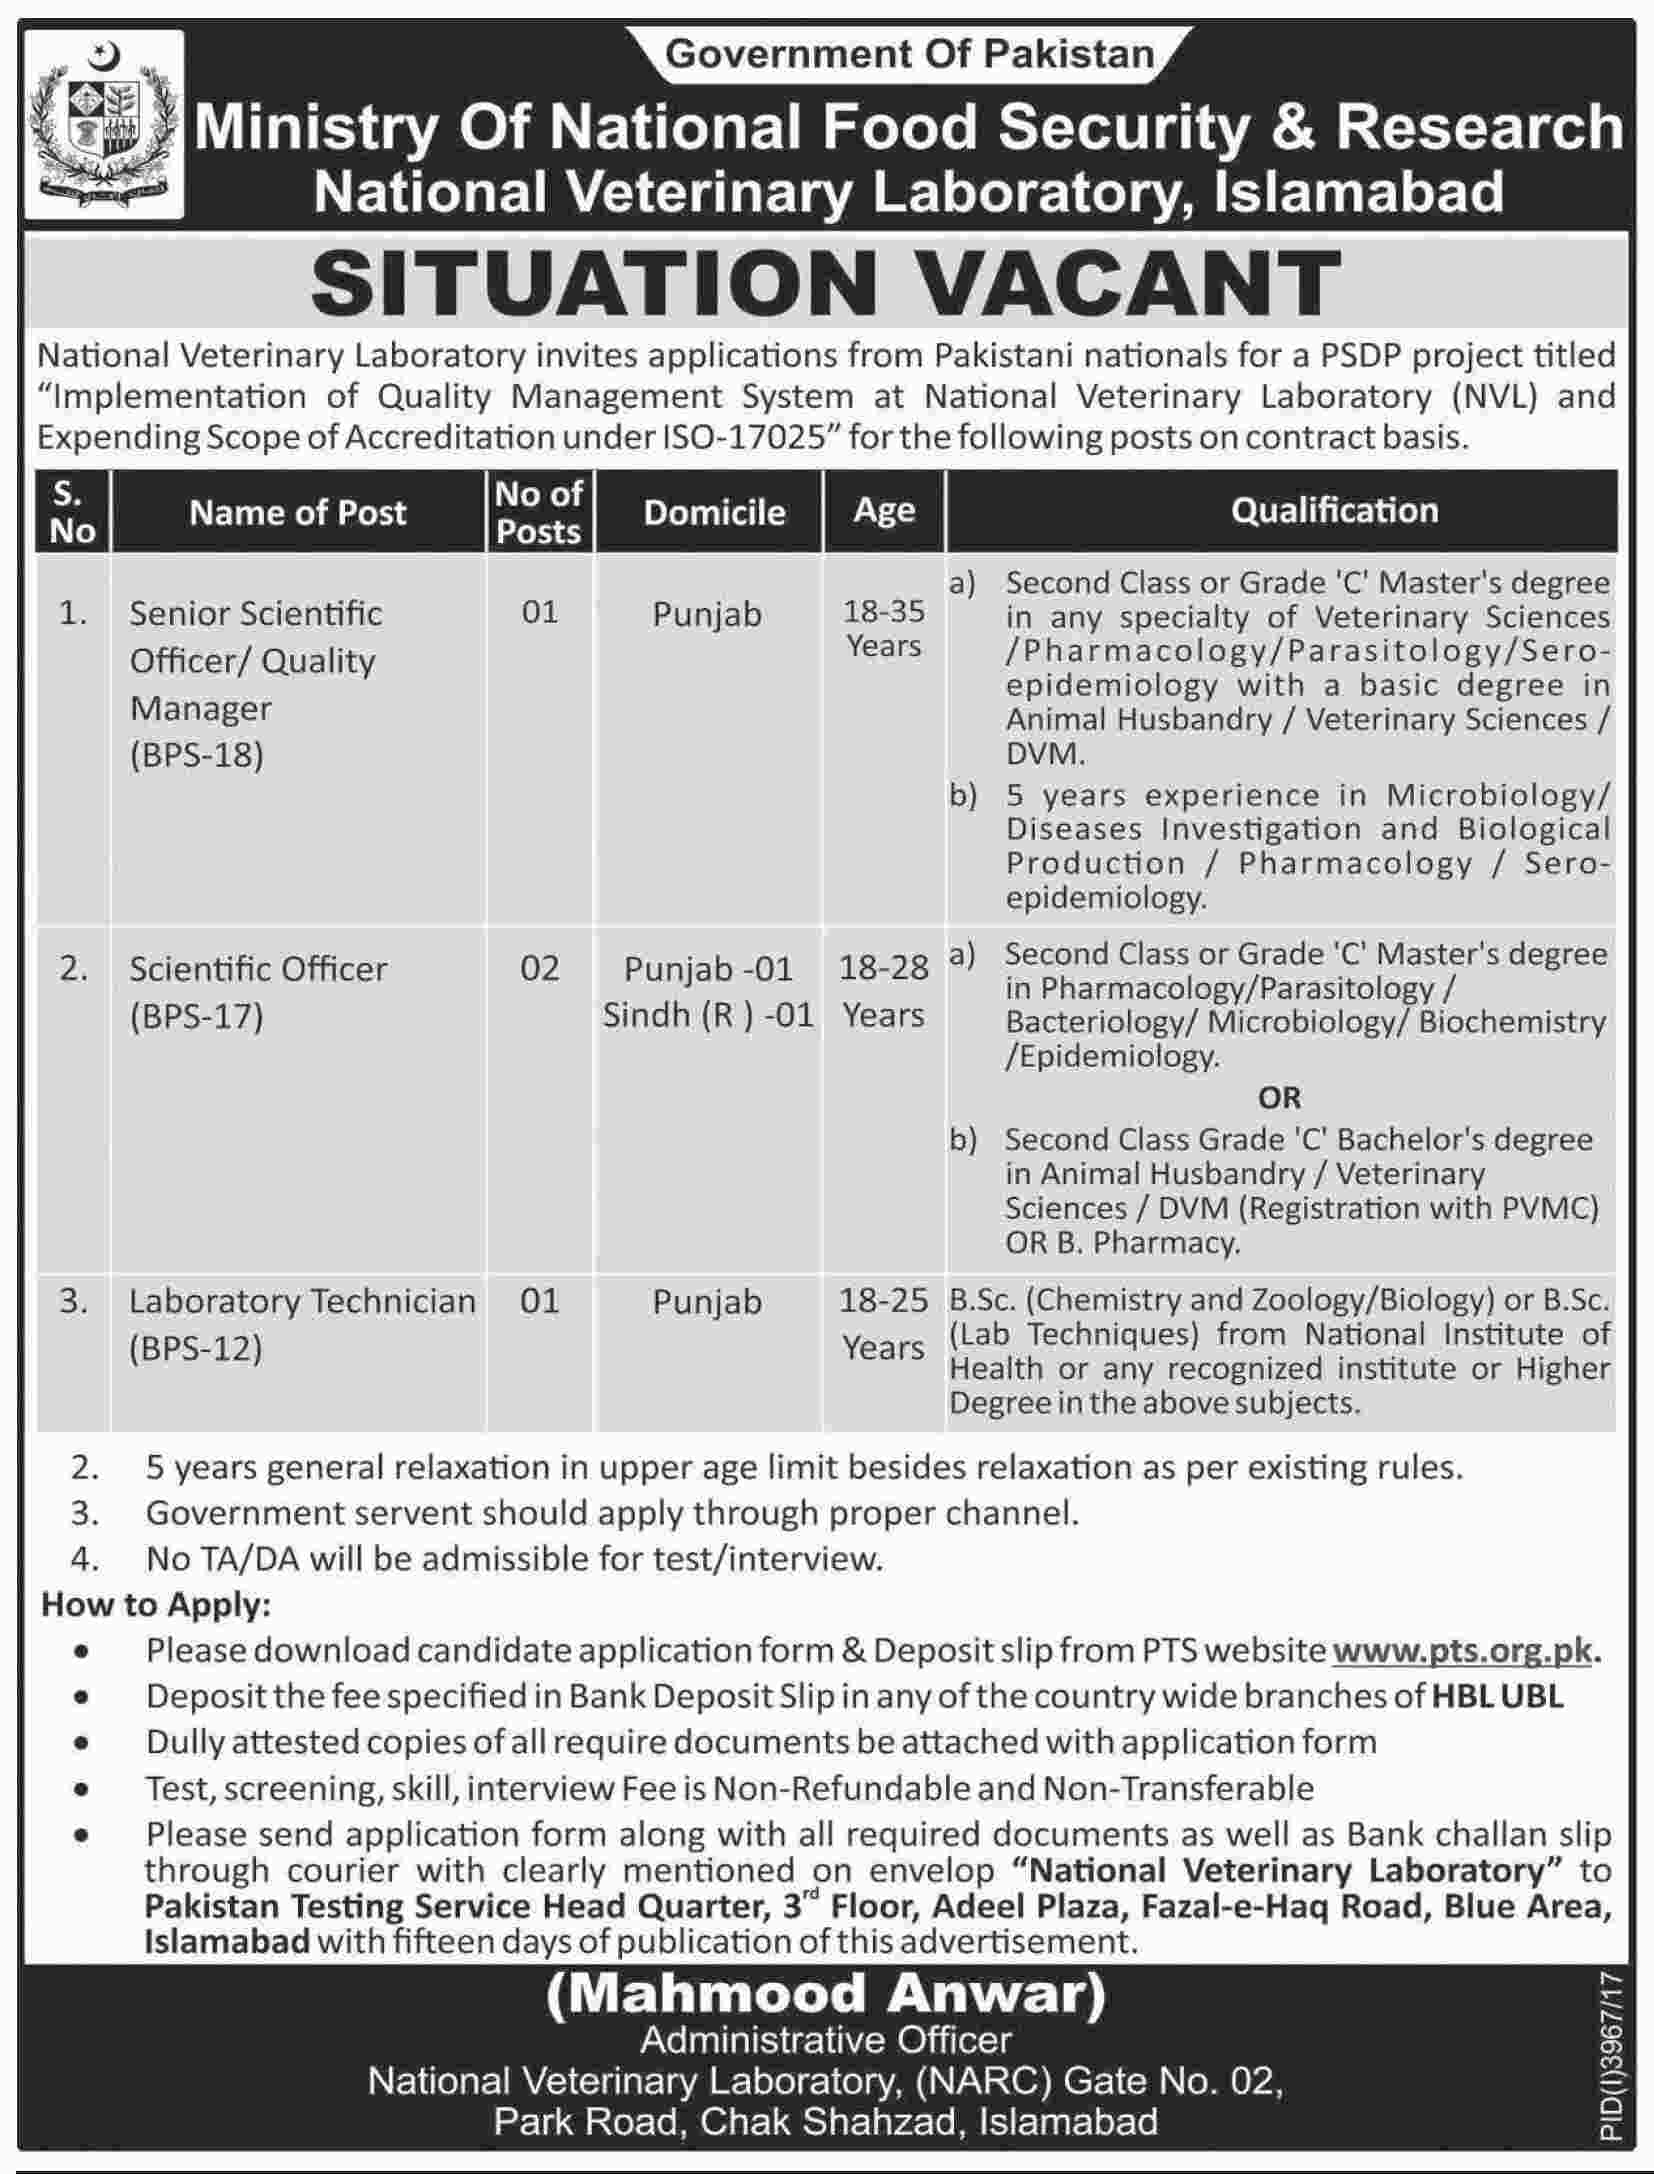 Jobs In Ministry Of National Food Security & Research 25 Jan 2018